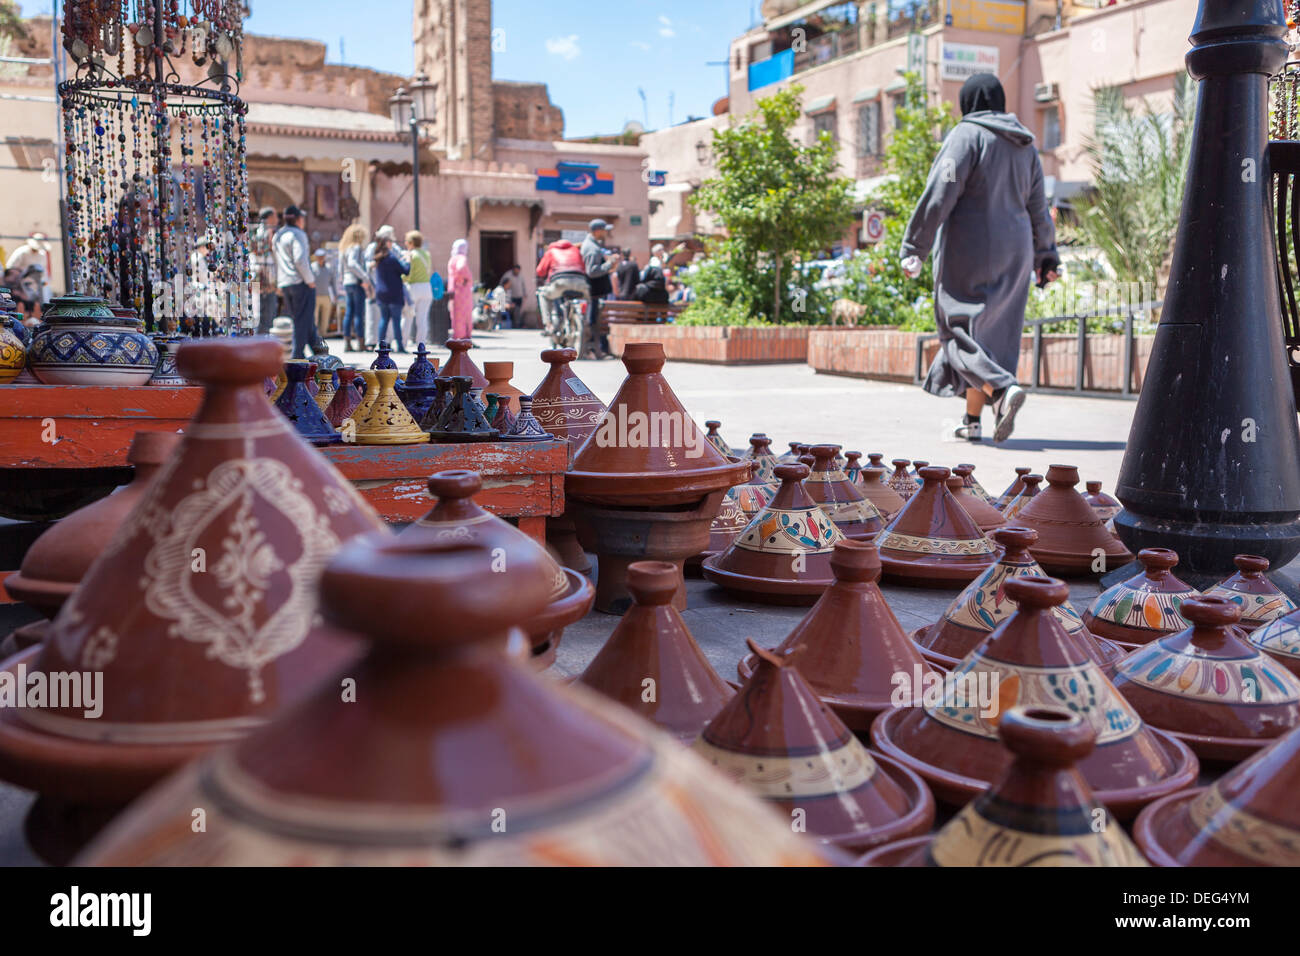 A street seller's wares, including tagines and clay pots near the Kasbah, Marrakech, Morocco, North Africa, Africa Stock Photo